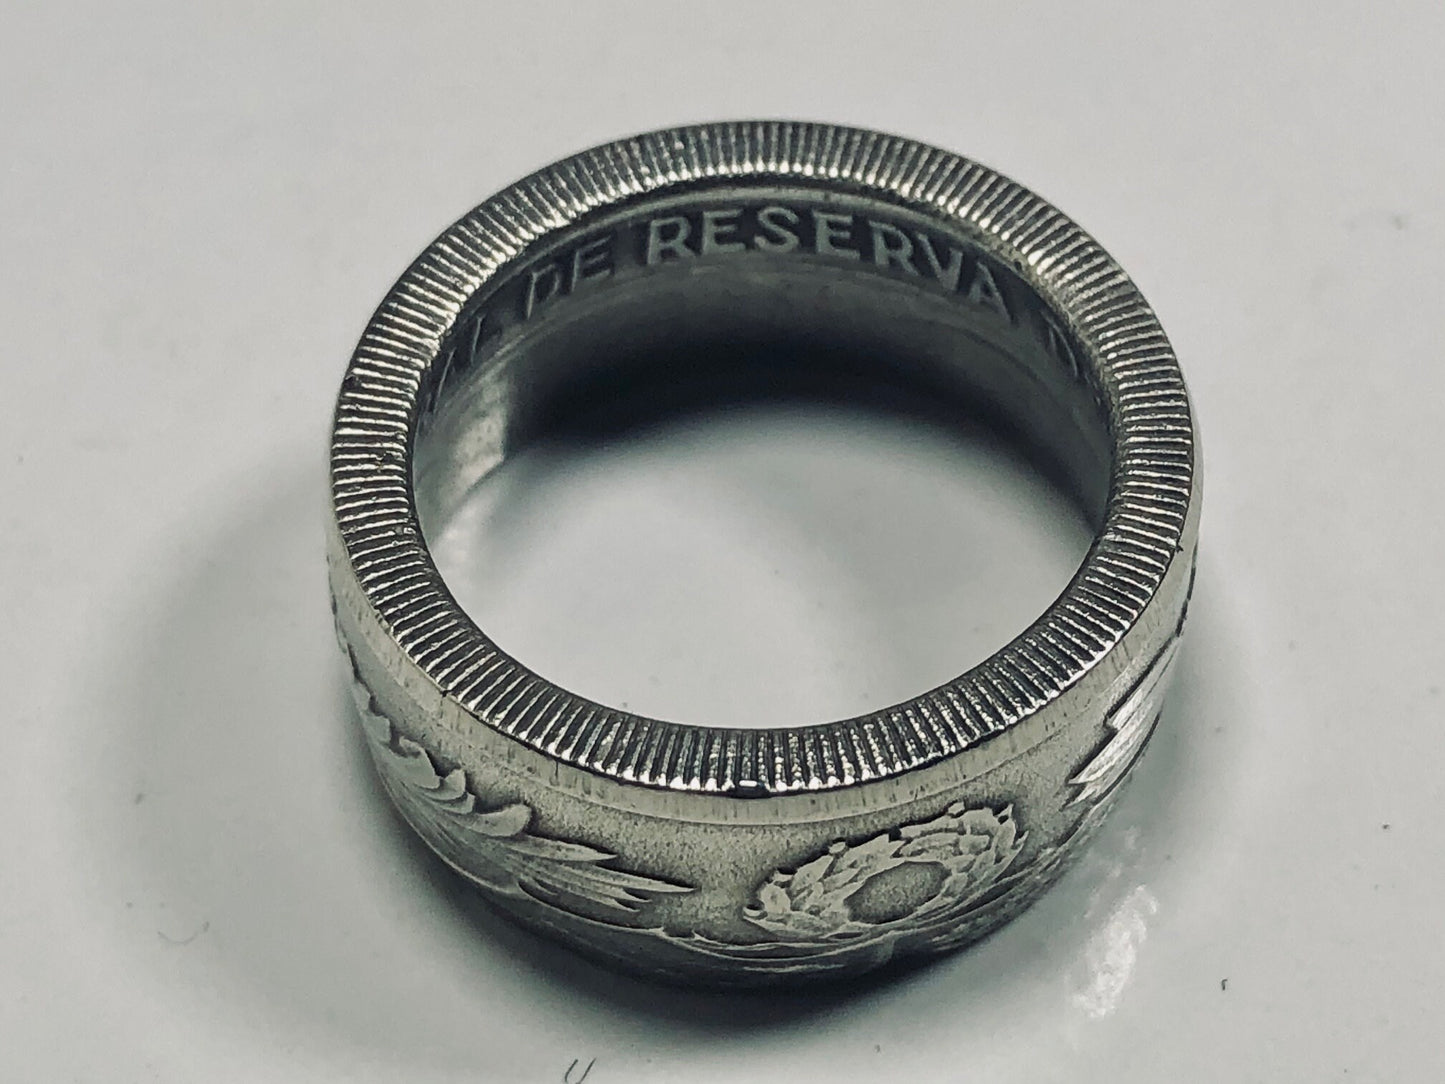 Peru Coin Ring Peruvian Handmade Personal Custom Charm Ring Gift For Friend Coin Ring Gift For Him Her World Coin Collector